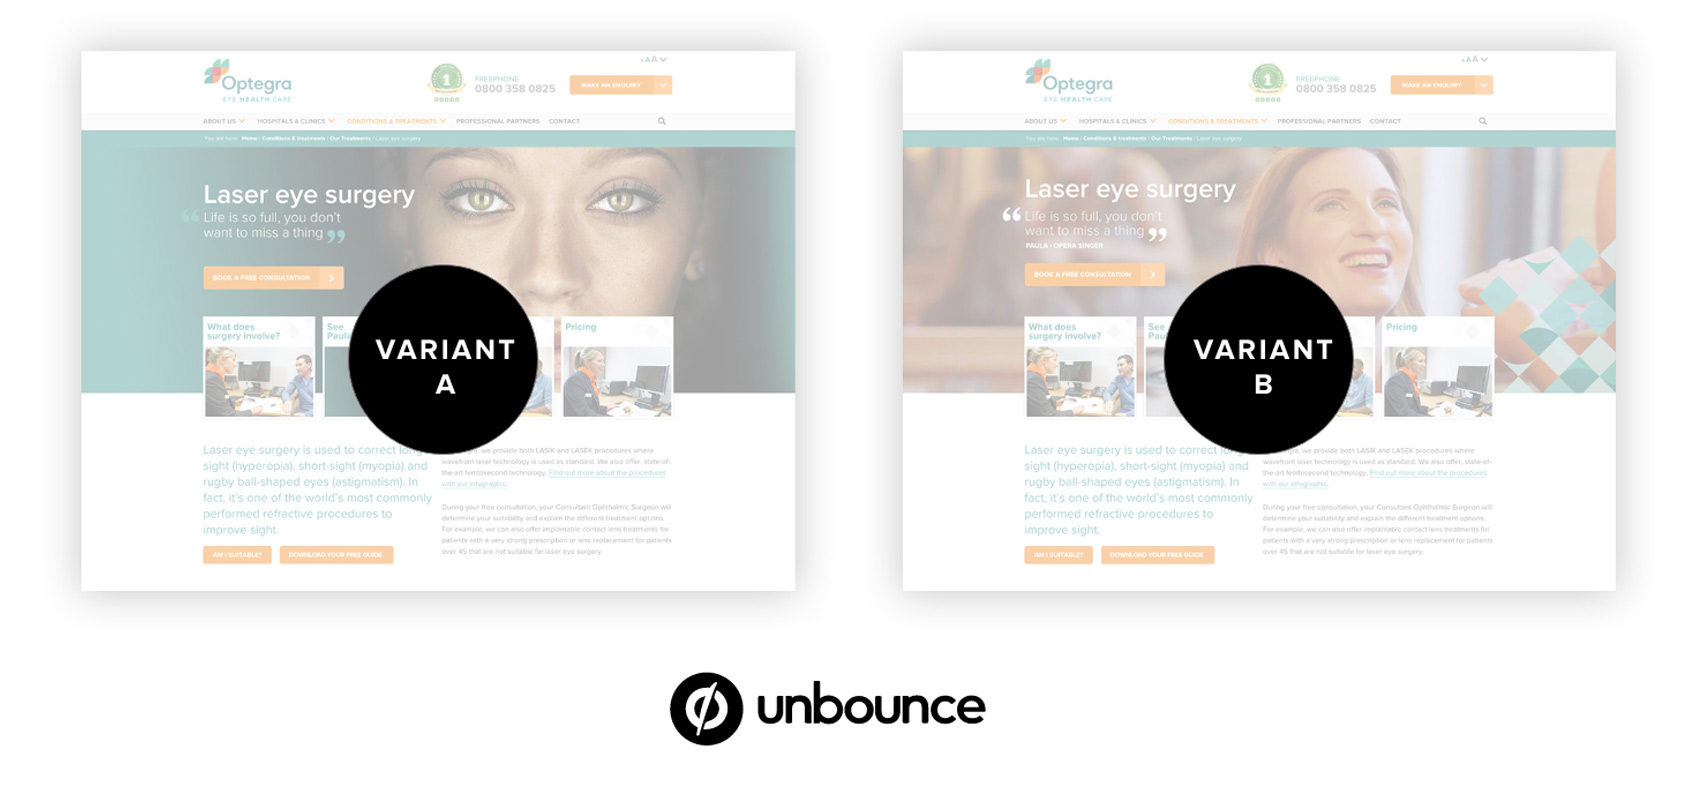 A/B testing using Unbounce